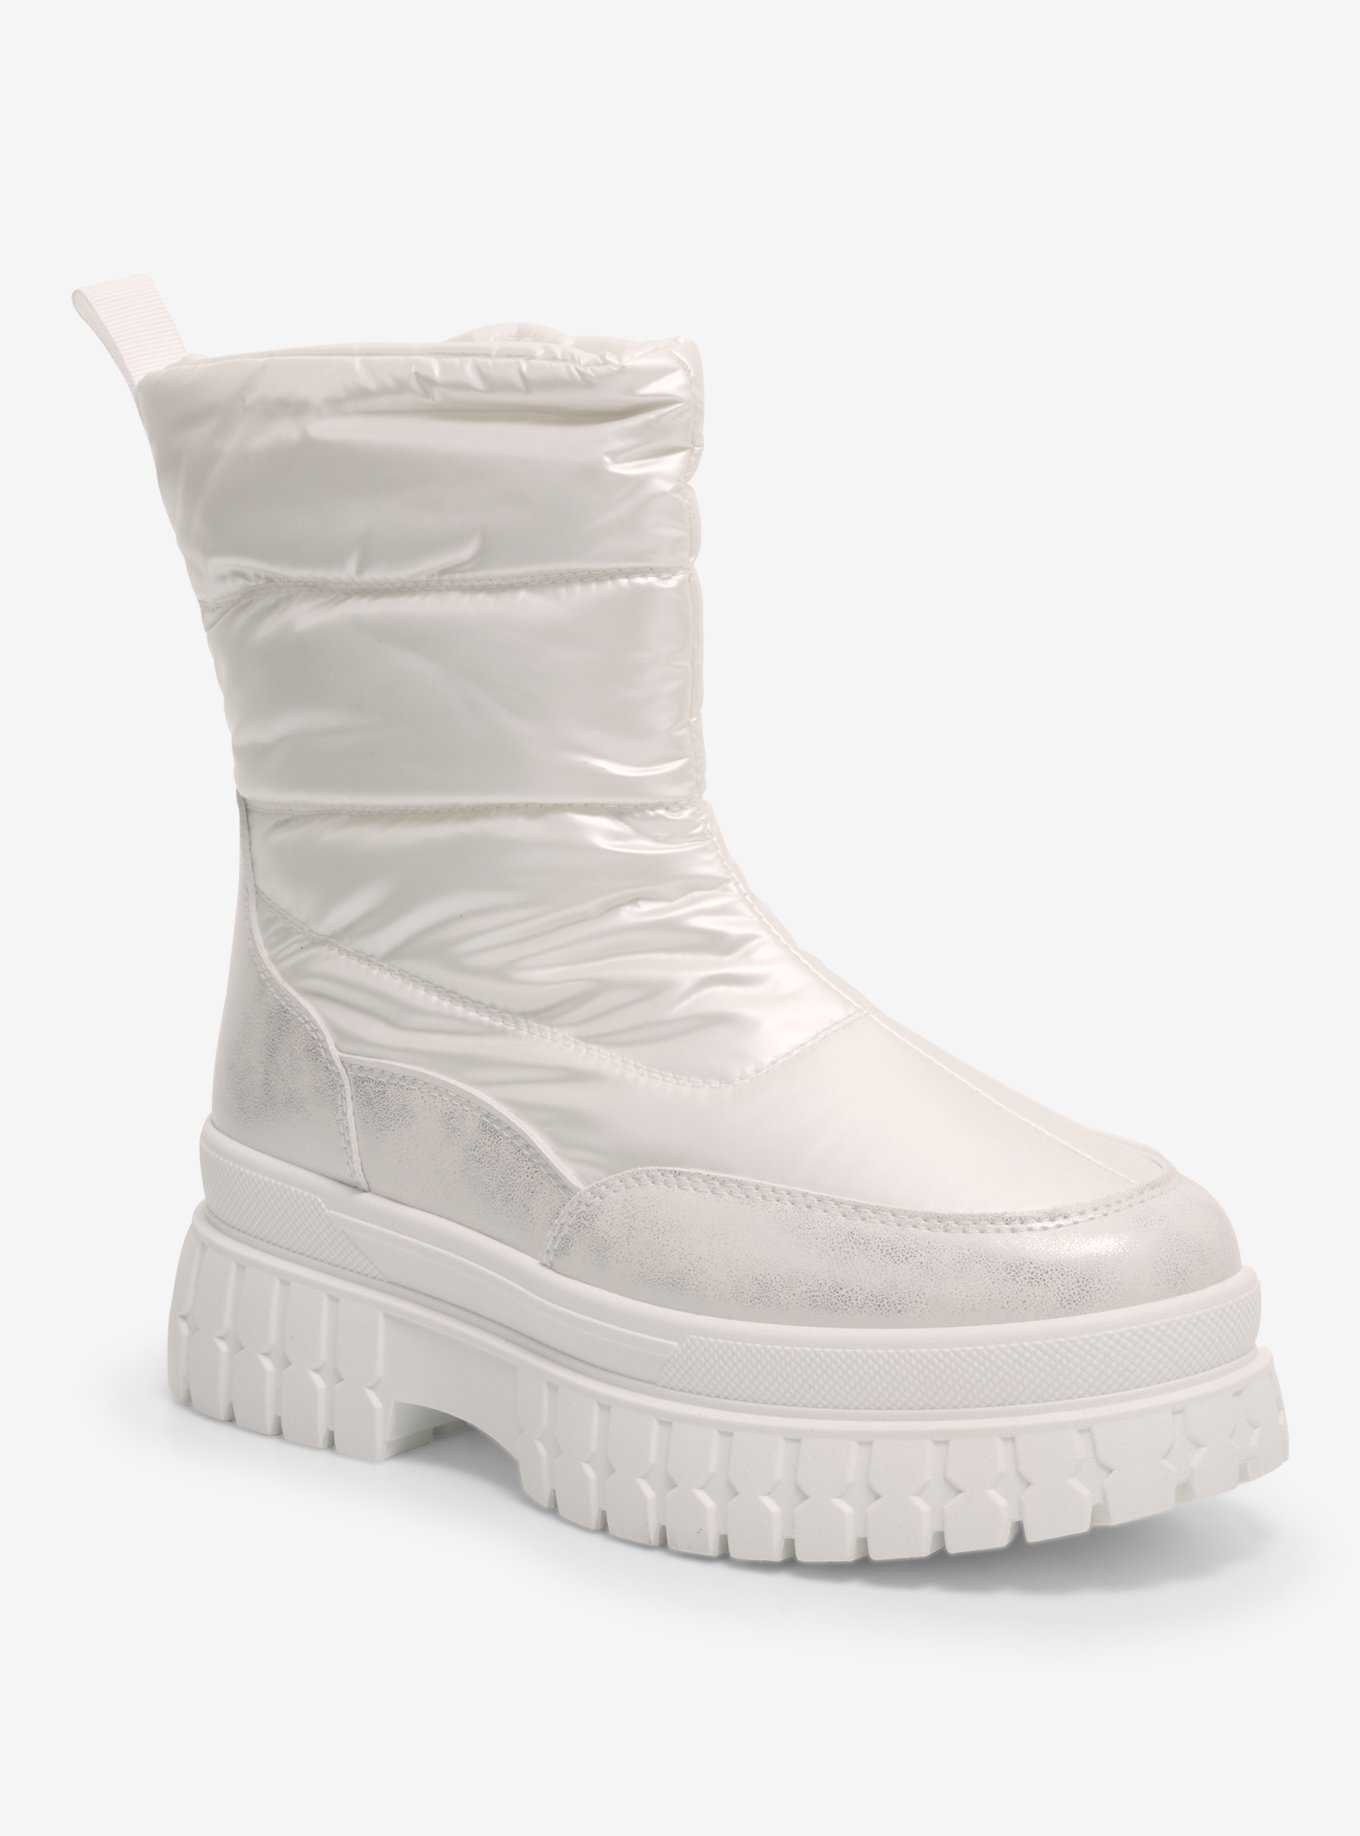 Dirty Laundry White Puffer Chunky Boots, , hi-res